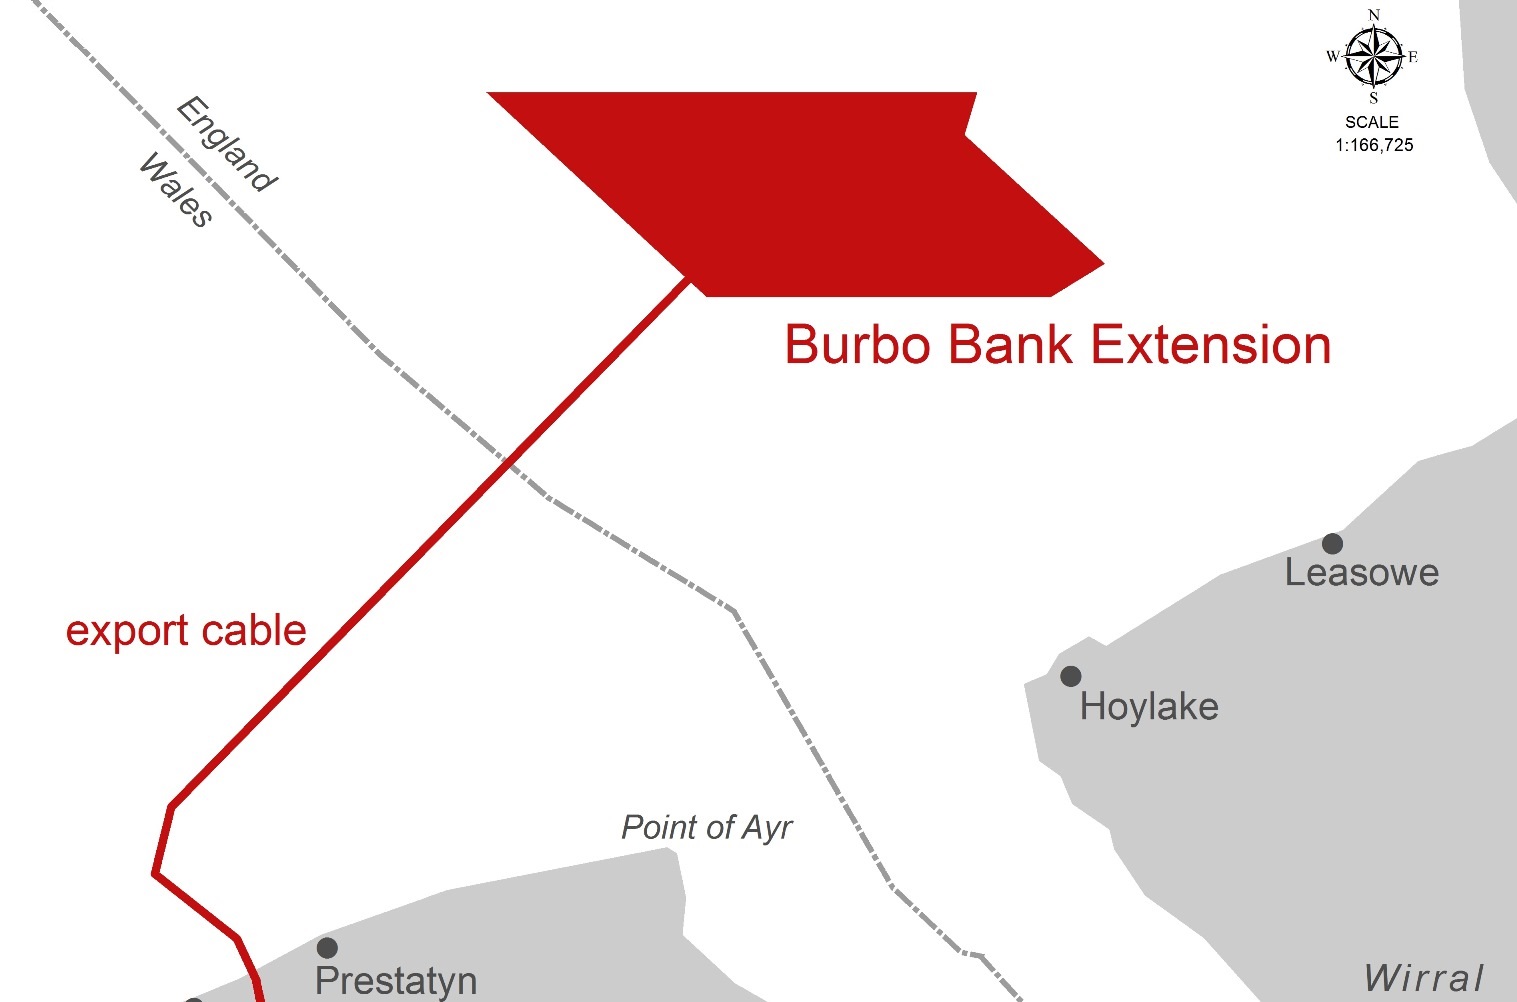 Geotechnical Survey to Begin at Burbo Bank Extension Soon (UK)